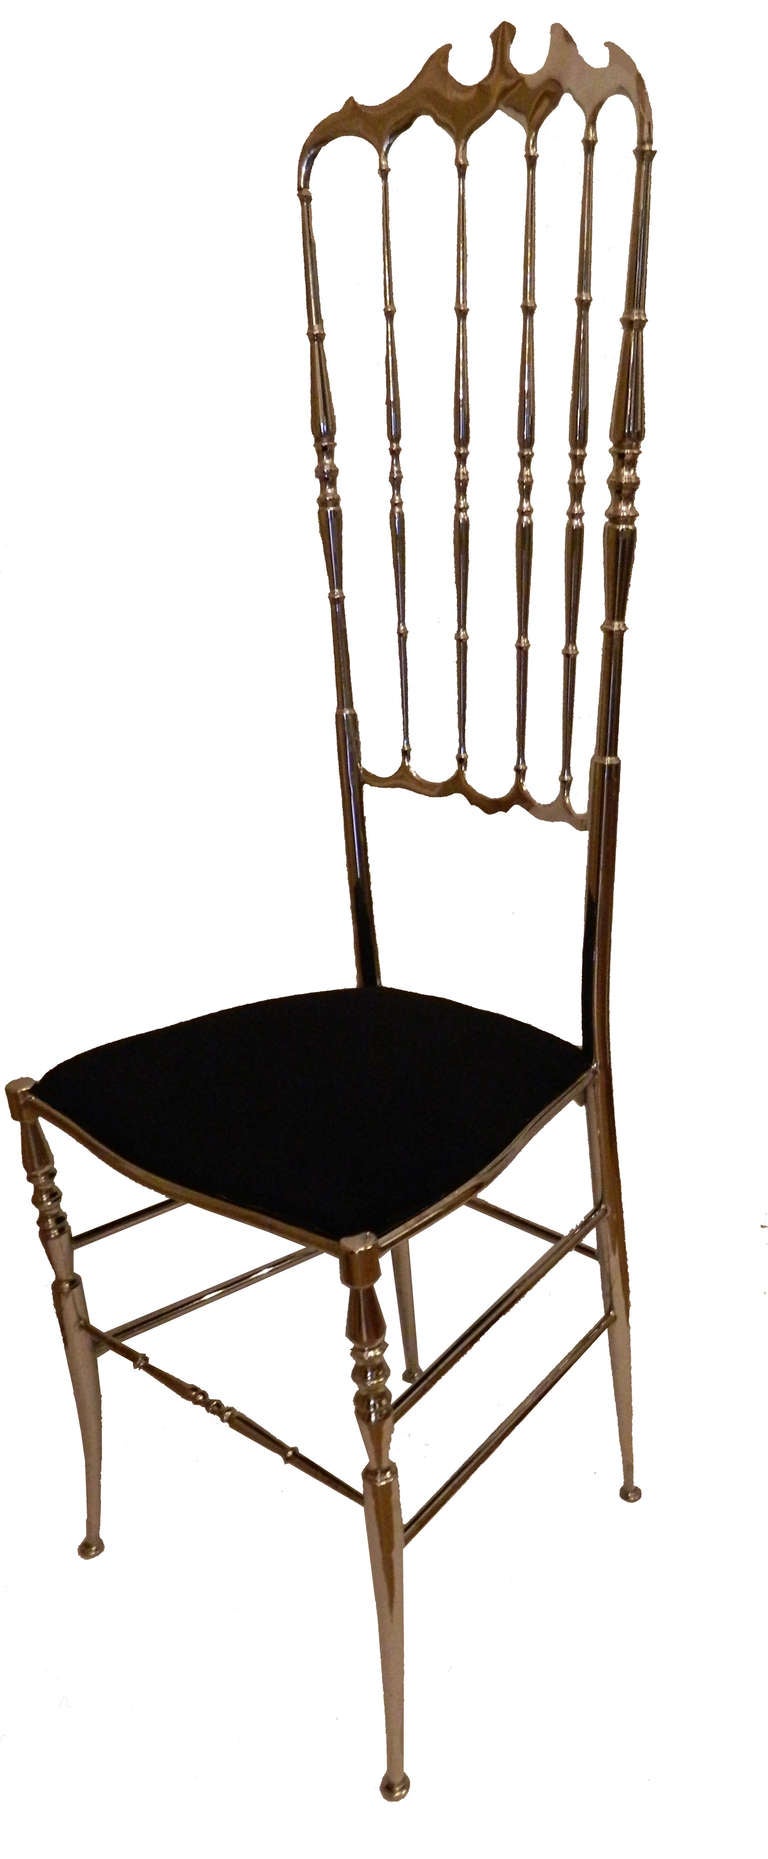 Set of height exceptional very high back nickel-plated Chiavari chairs.
Black ultra suede top seat.Only 6 pictured.
Similar chairs are at the Le Cystal Room Restaurant of Maison Baccarat, Place des Etats Unis in Paris, decorated and designed by